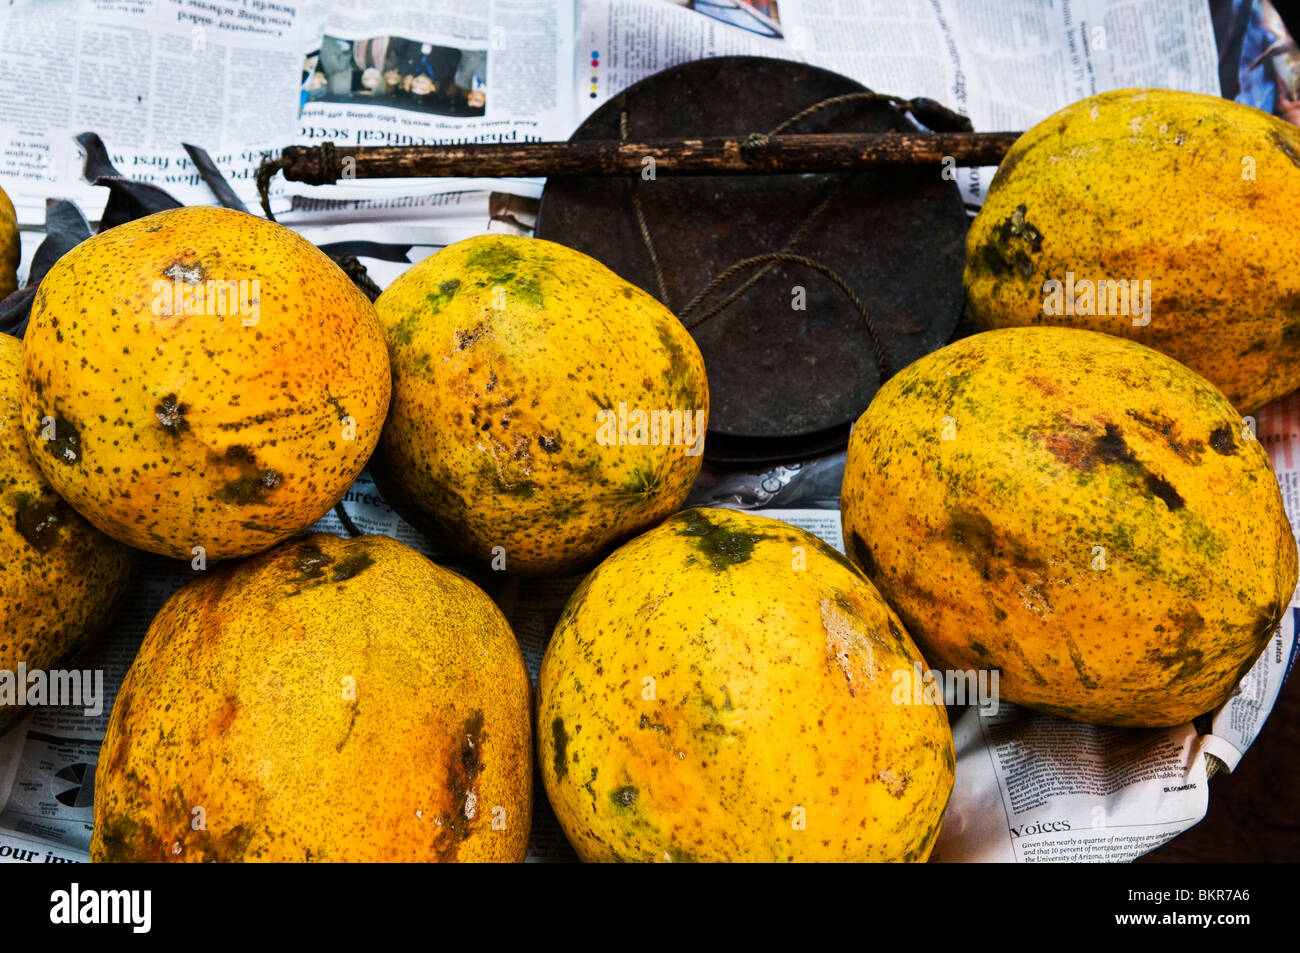 Tasty Papayas sold in a colorful market. Stock Photo